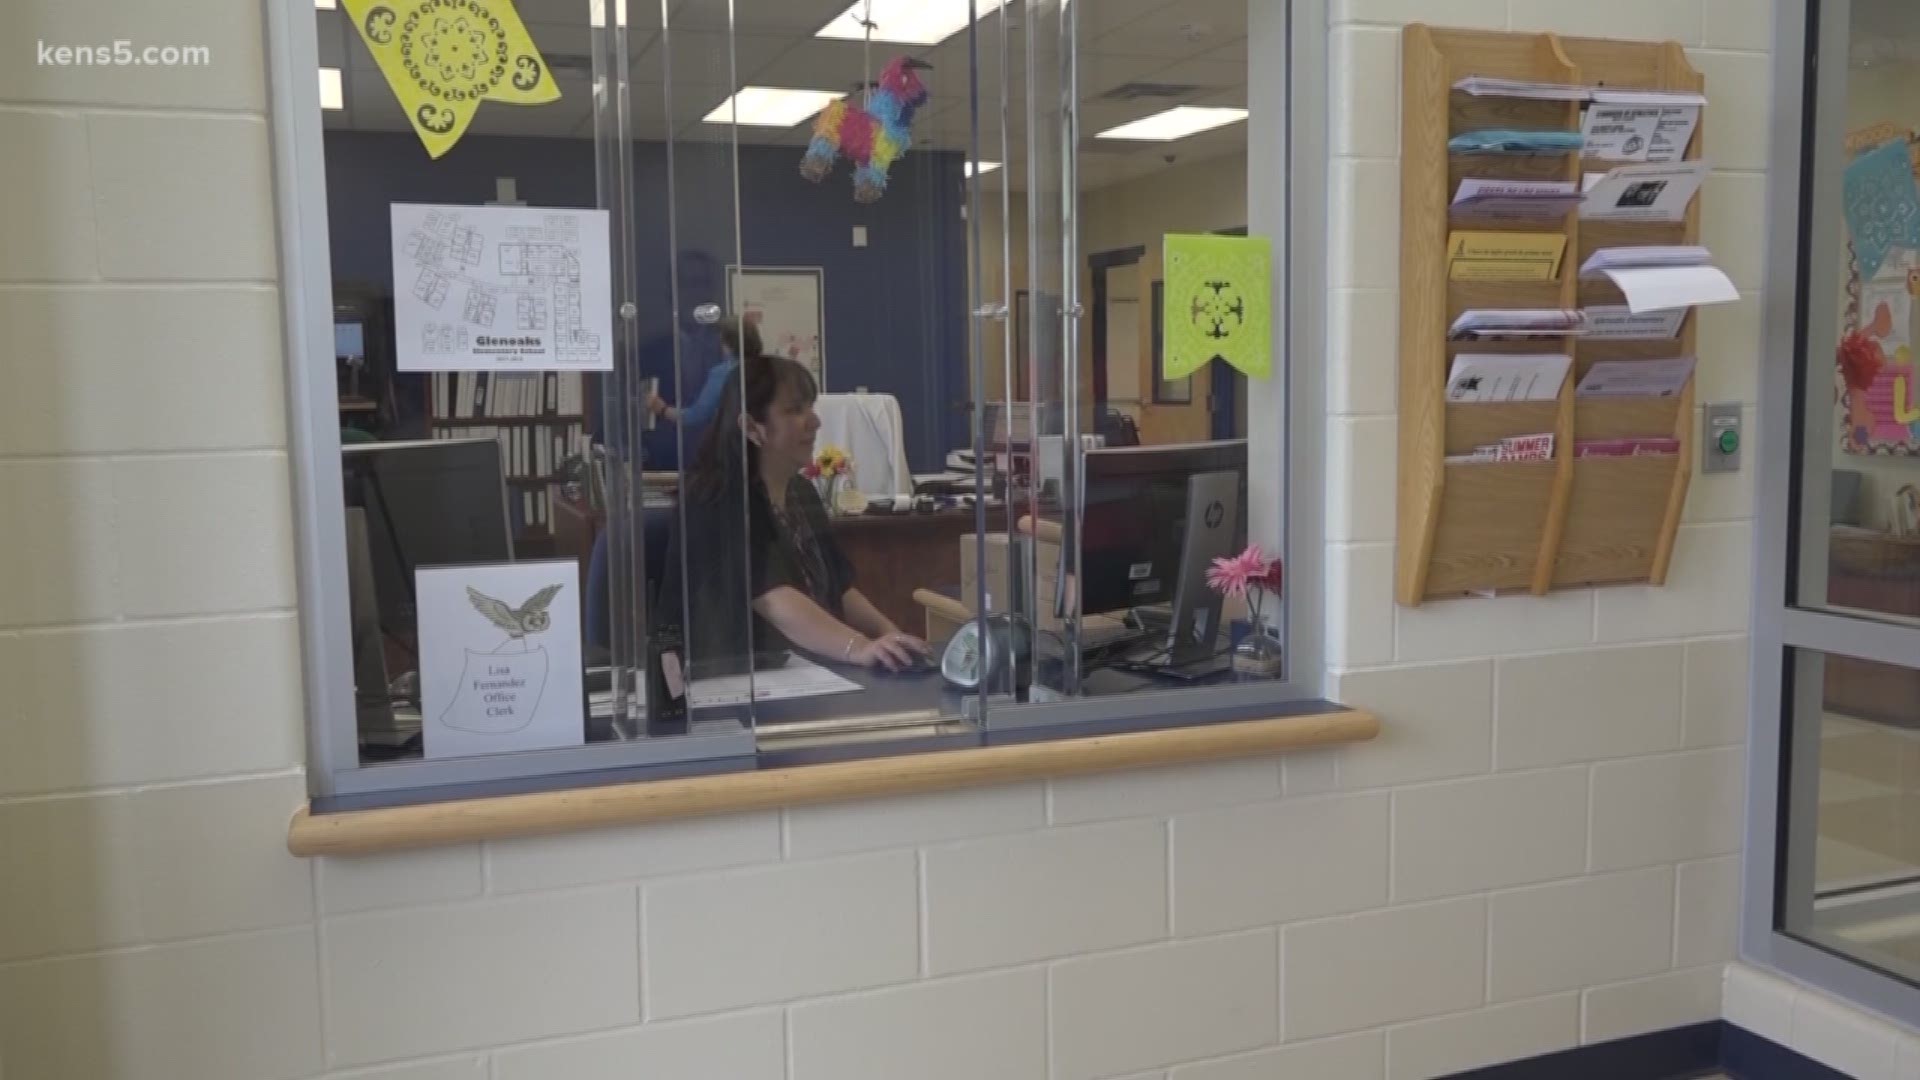 Northside ISD is proposing a school bond worth nearly $850 million to pay for, among other things, bulletproof windows in school lobbies.